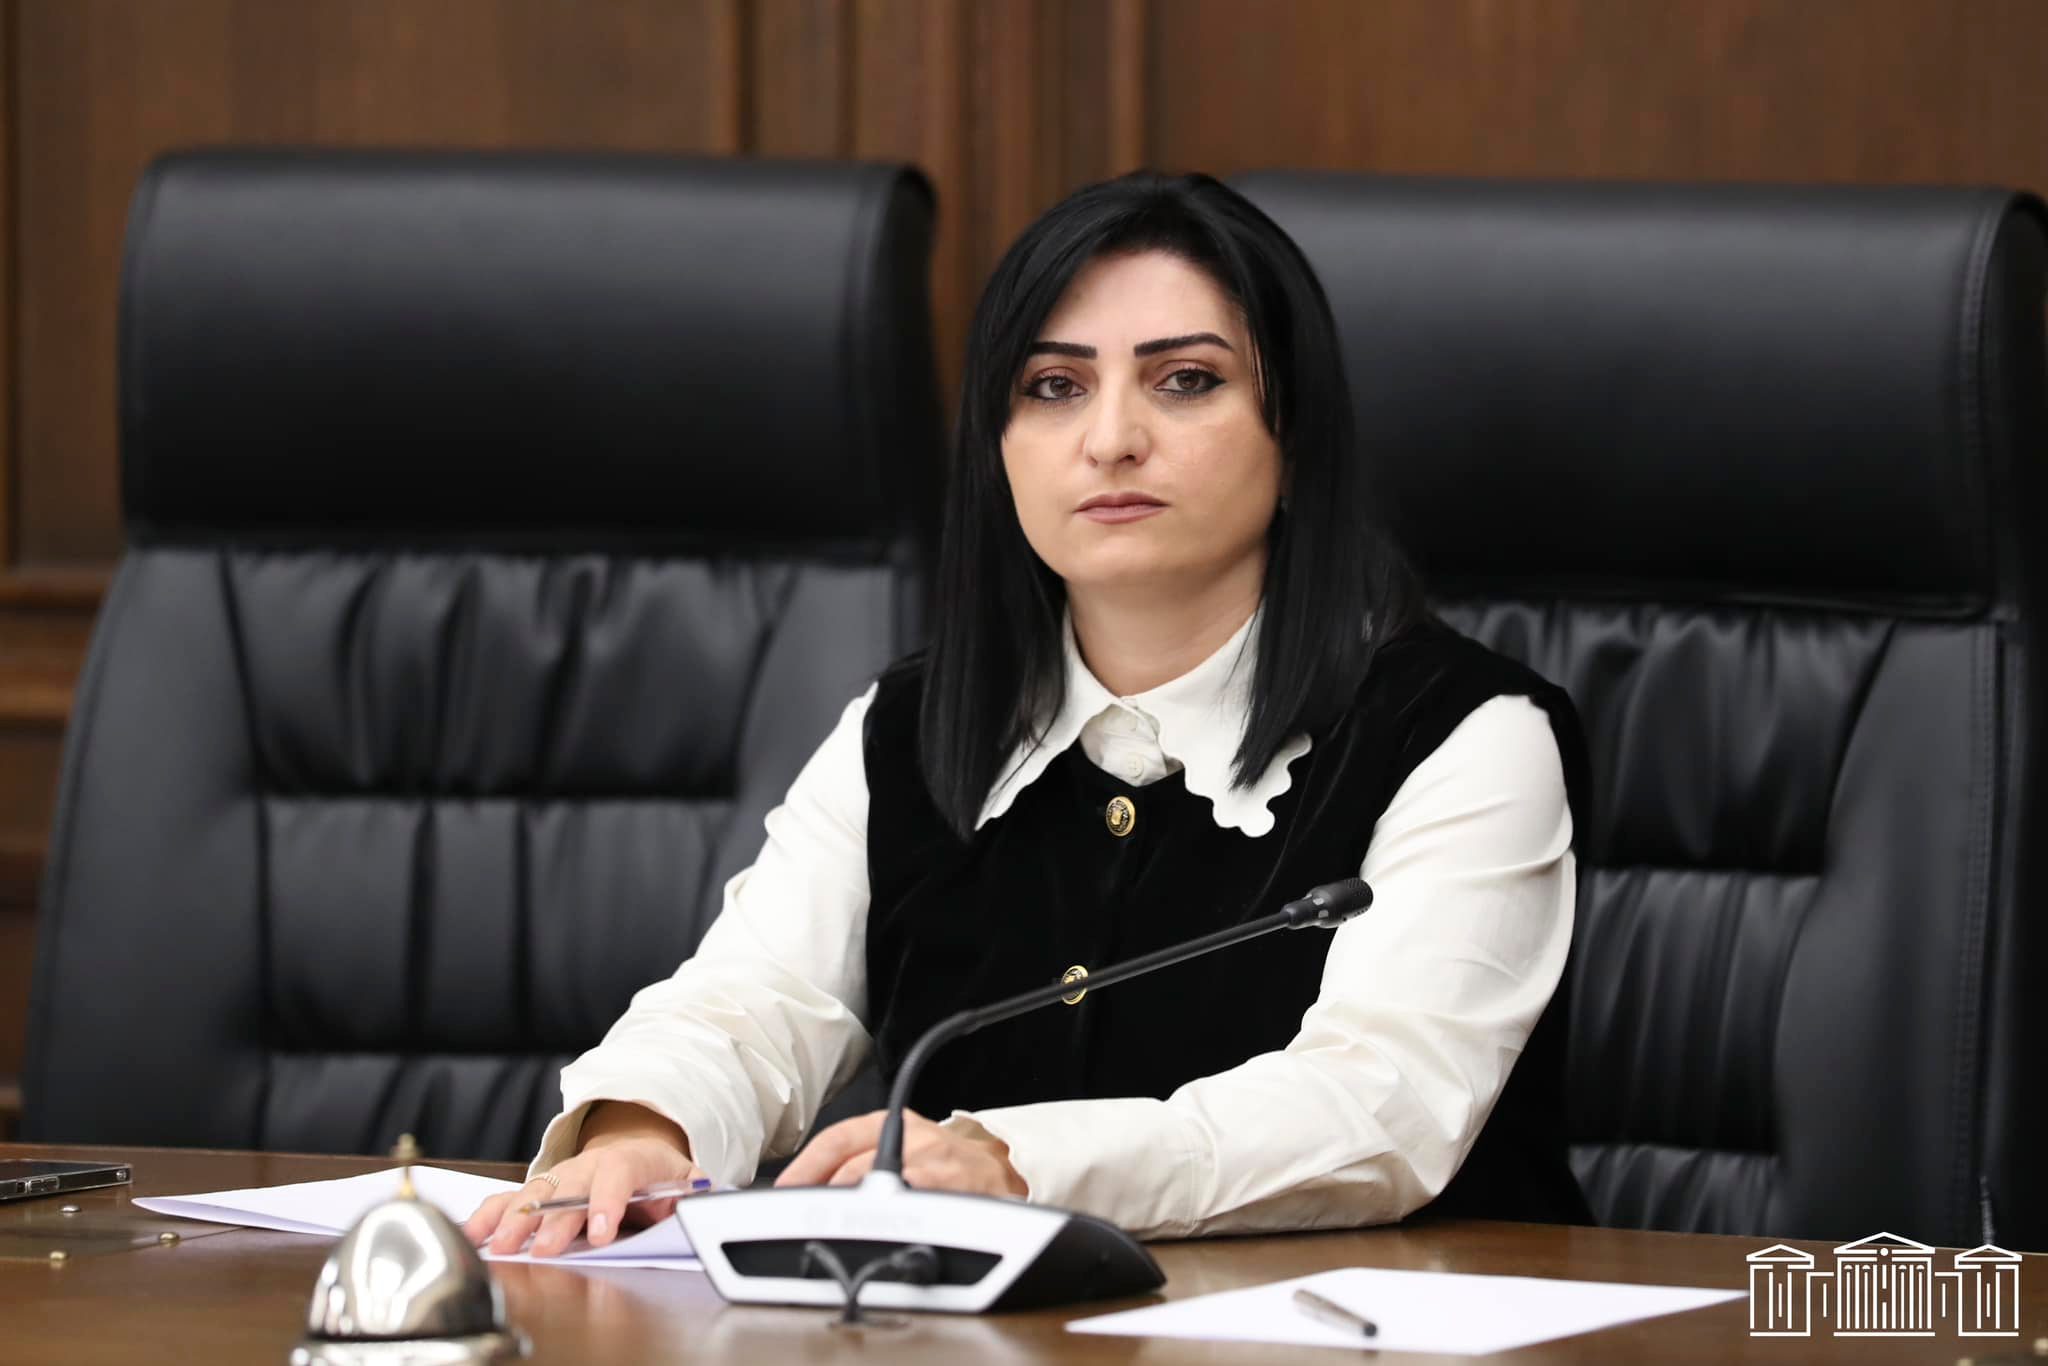 Impose sanctions, hold Azerbaijan accountable for launching another military aggression against the sovereign territory of Armenia-Taguhi Tovmasyan